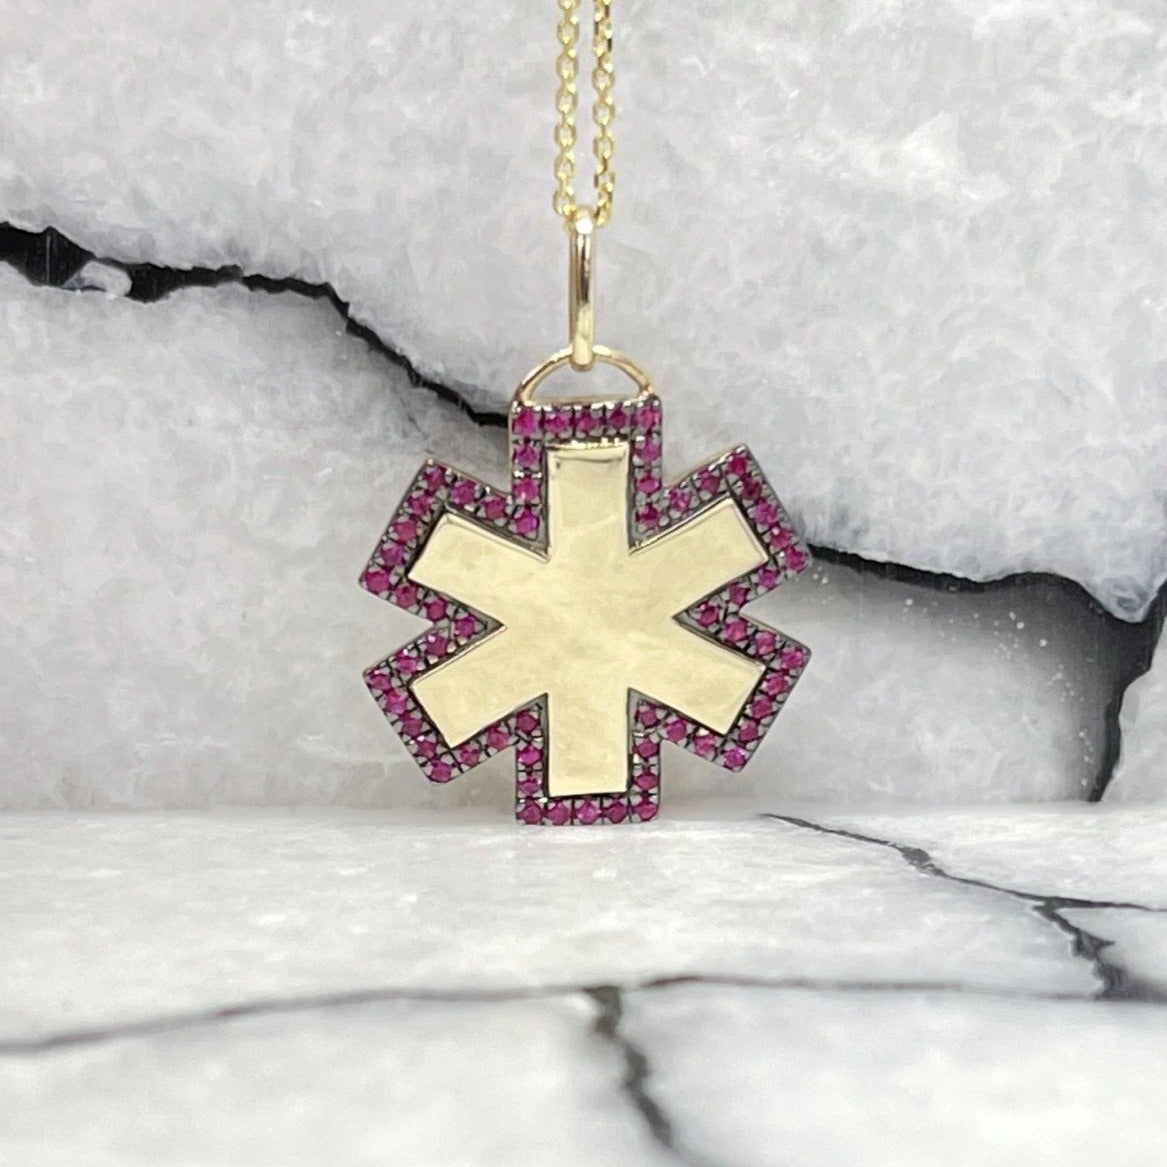 Medical ID Star of Life Charm Necklace Bracelet from Charmed Medical Jewelry - 14K Gold Ruby